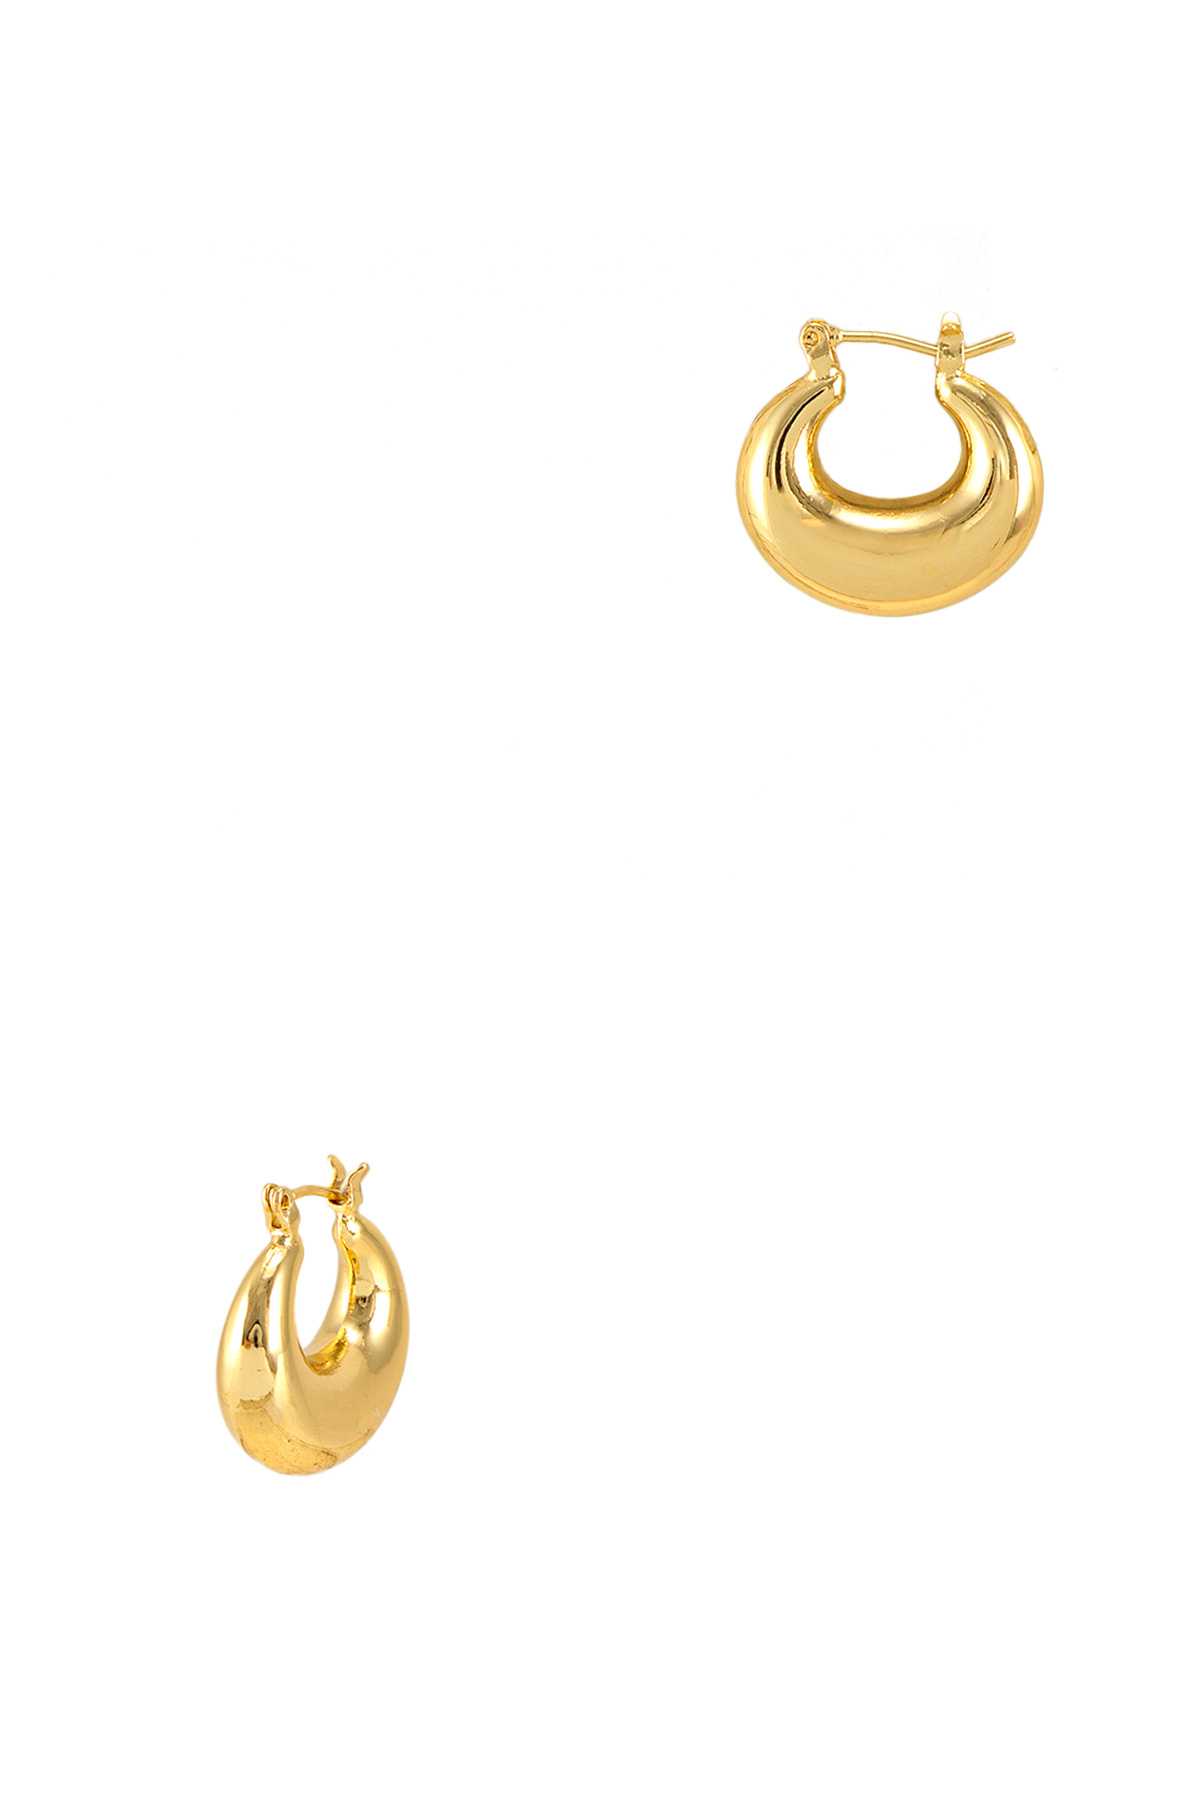 GOLD DIPPED Polished Graduated Hoop Earring